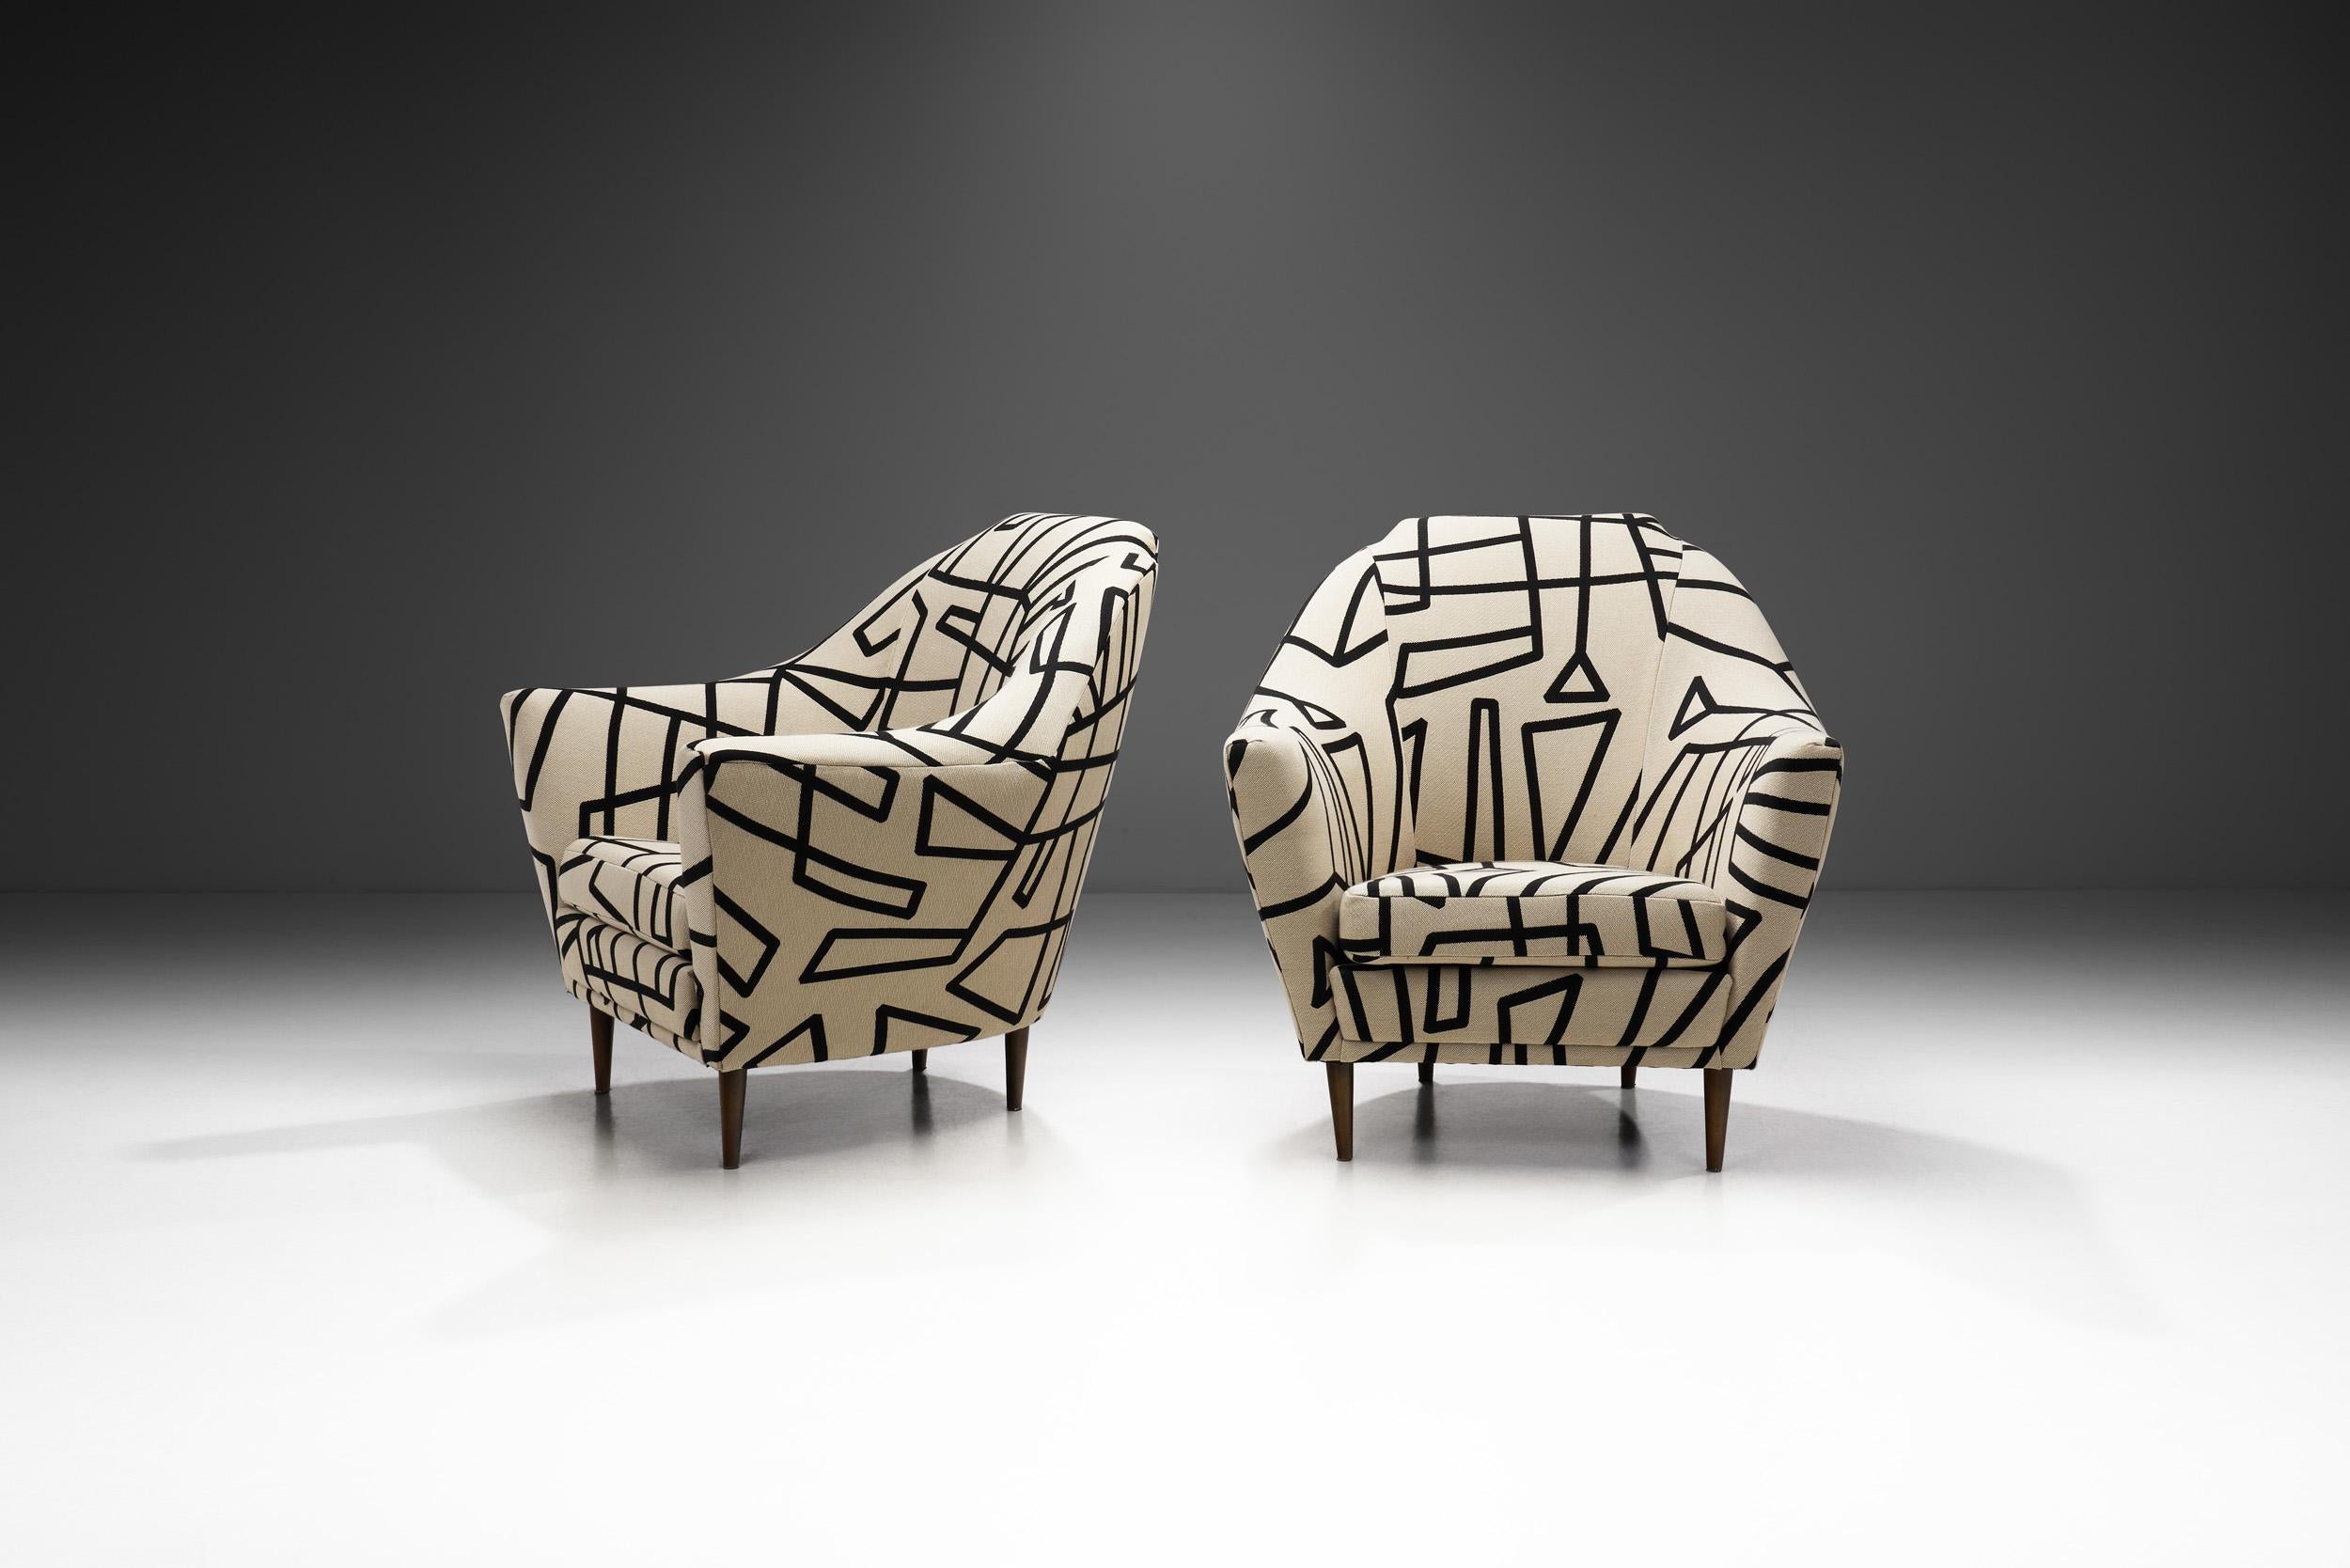 These individualistic chairs possess a playful and stylish look that Italian Modern furniture is beloved and coveted for. Defined by the stylish silhouette of the design covered in a characteristic, geometric patterned fabric, perfect execution, and